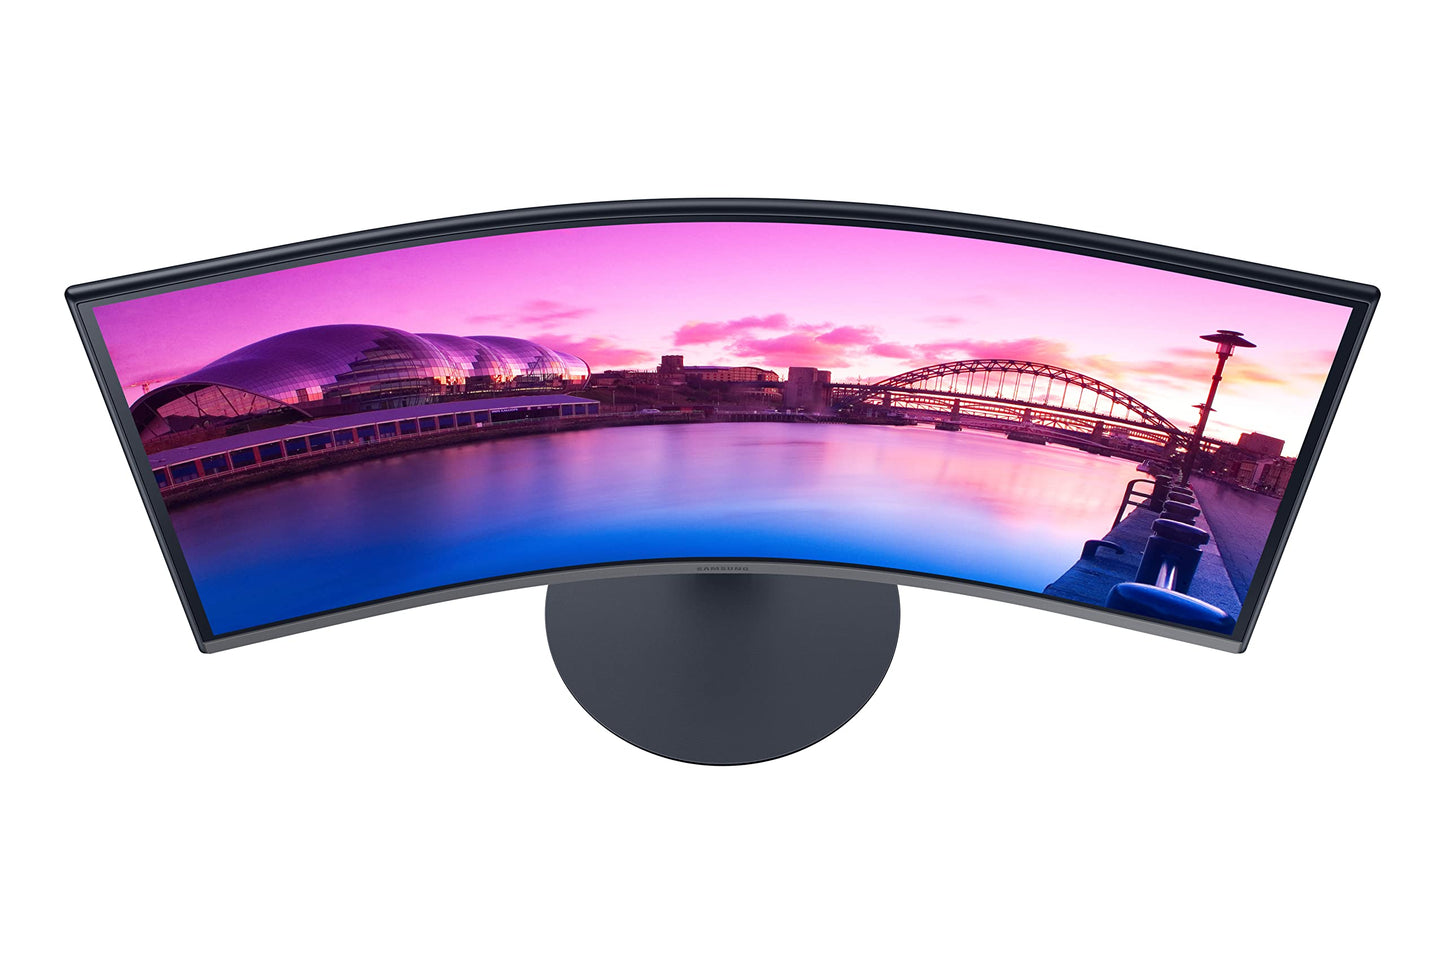 S39C FHD 75Hz Curved Monitor